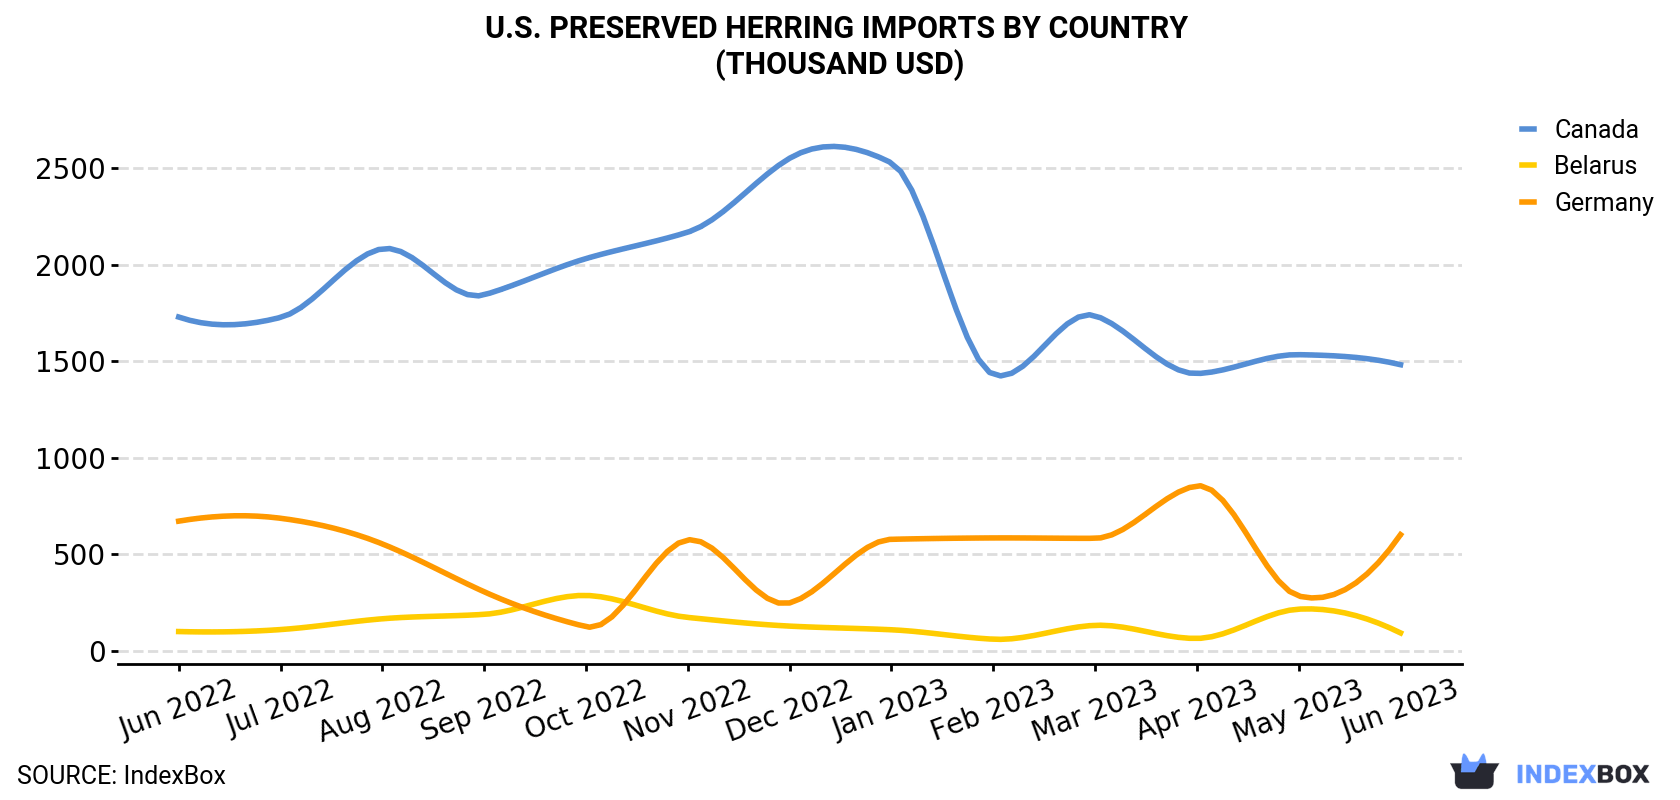 U.S. Preserved Herring Imports By Country (Thousand USD)